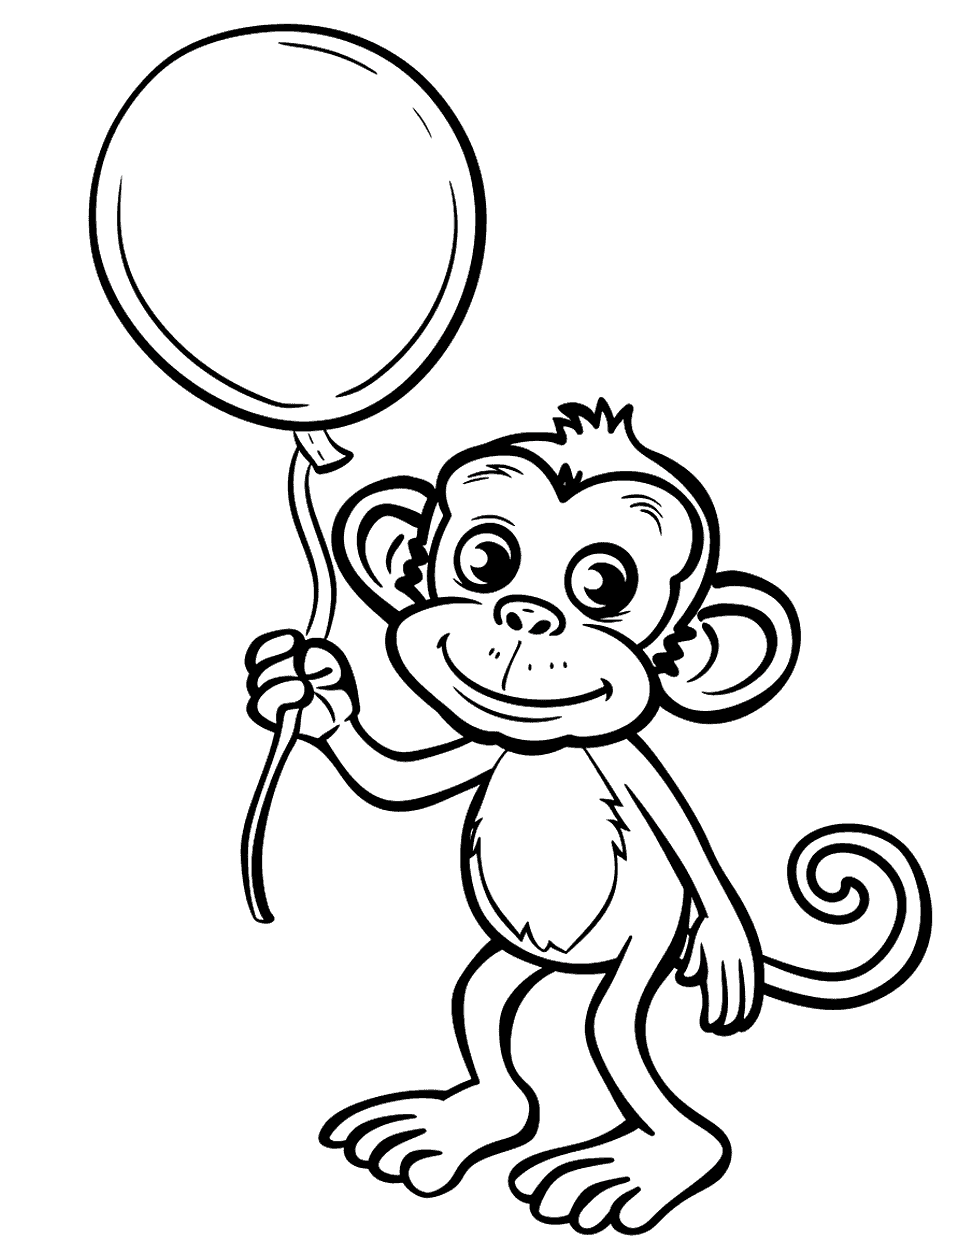 Monkey with a Balloon Coloring Page - A monkey holding a single big balloon on a string.